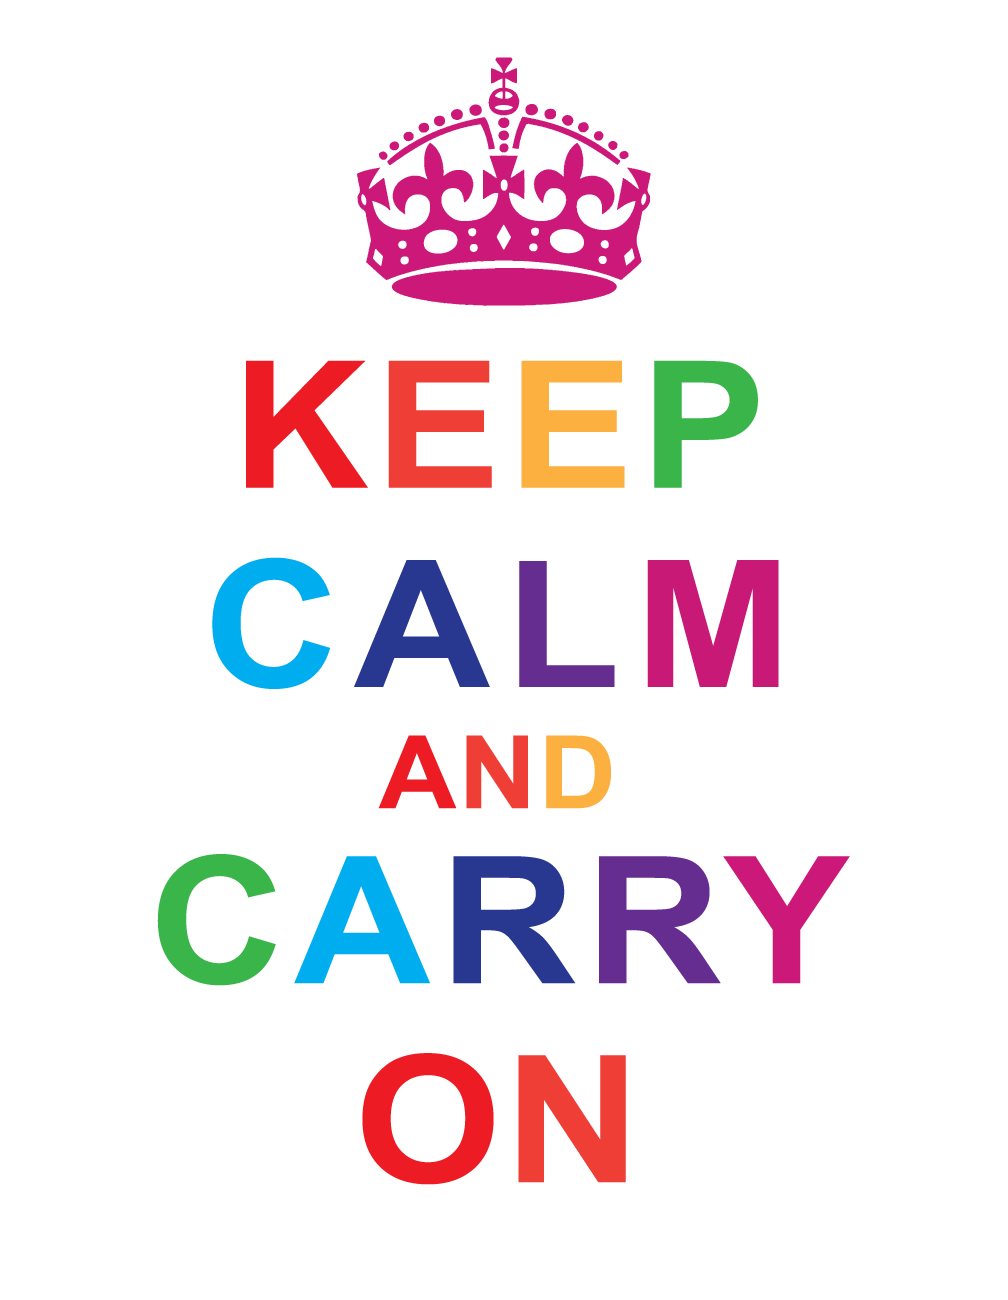 Keep Calm and Carry On in rainbow letters